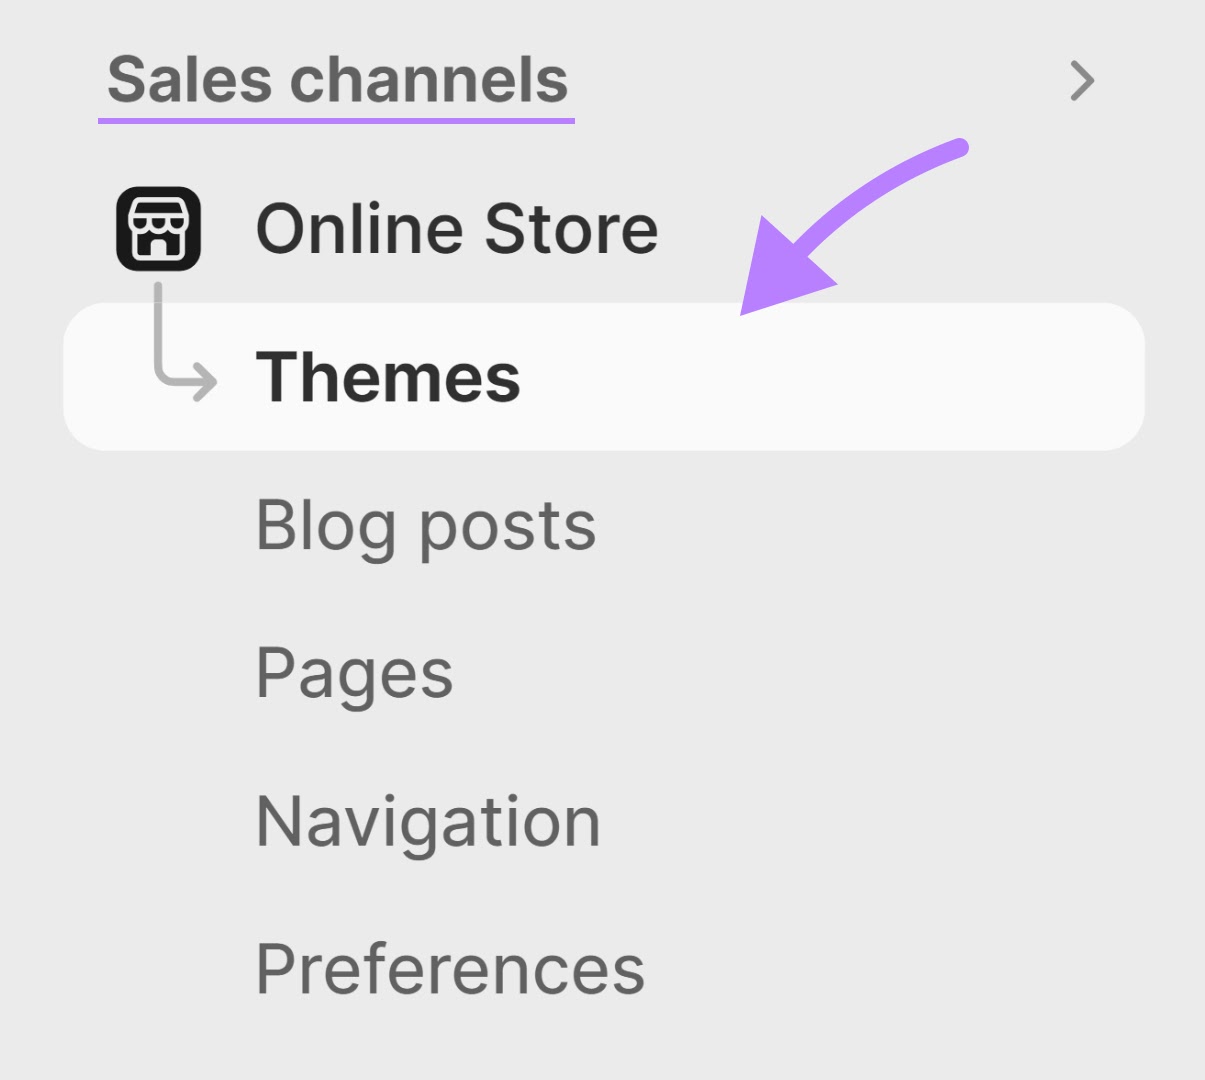 Navigating to "Online Store" > "Themes" in Shopify admin dashboard